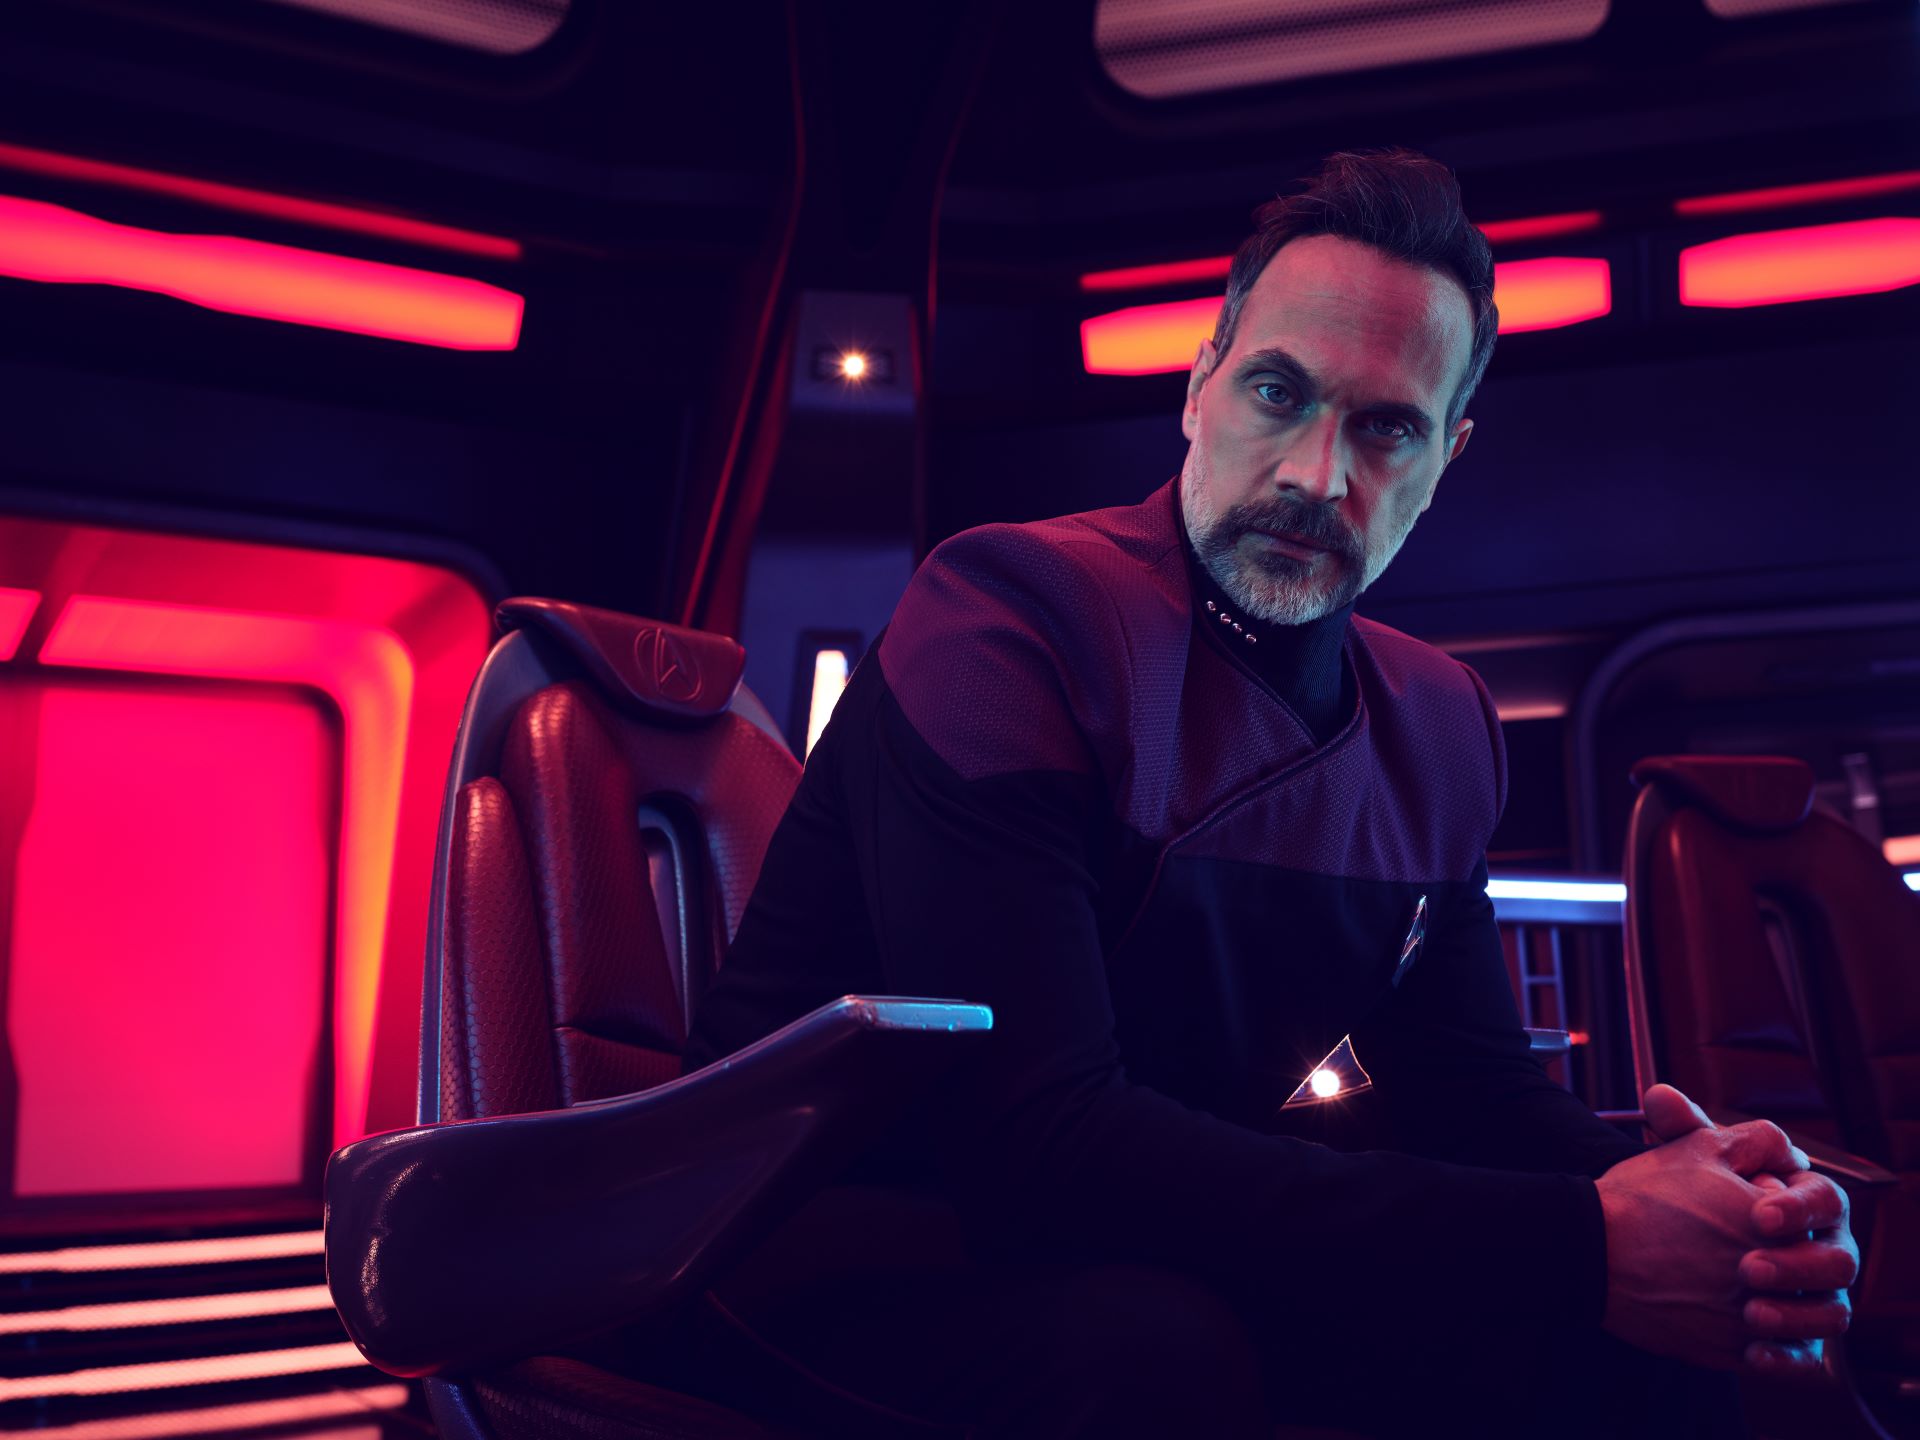 Captain Liam Shaw, played by Todd Stashwick, is one of the new characters of the season.